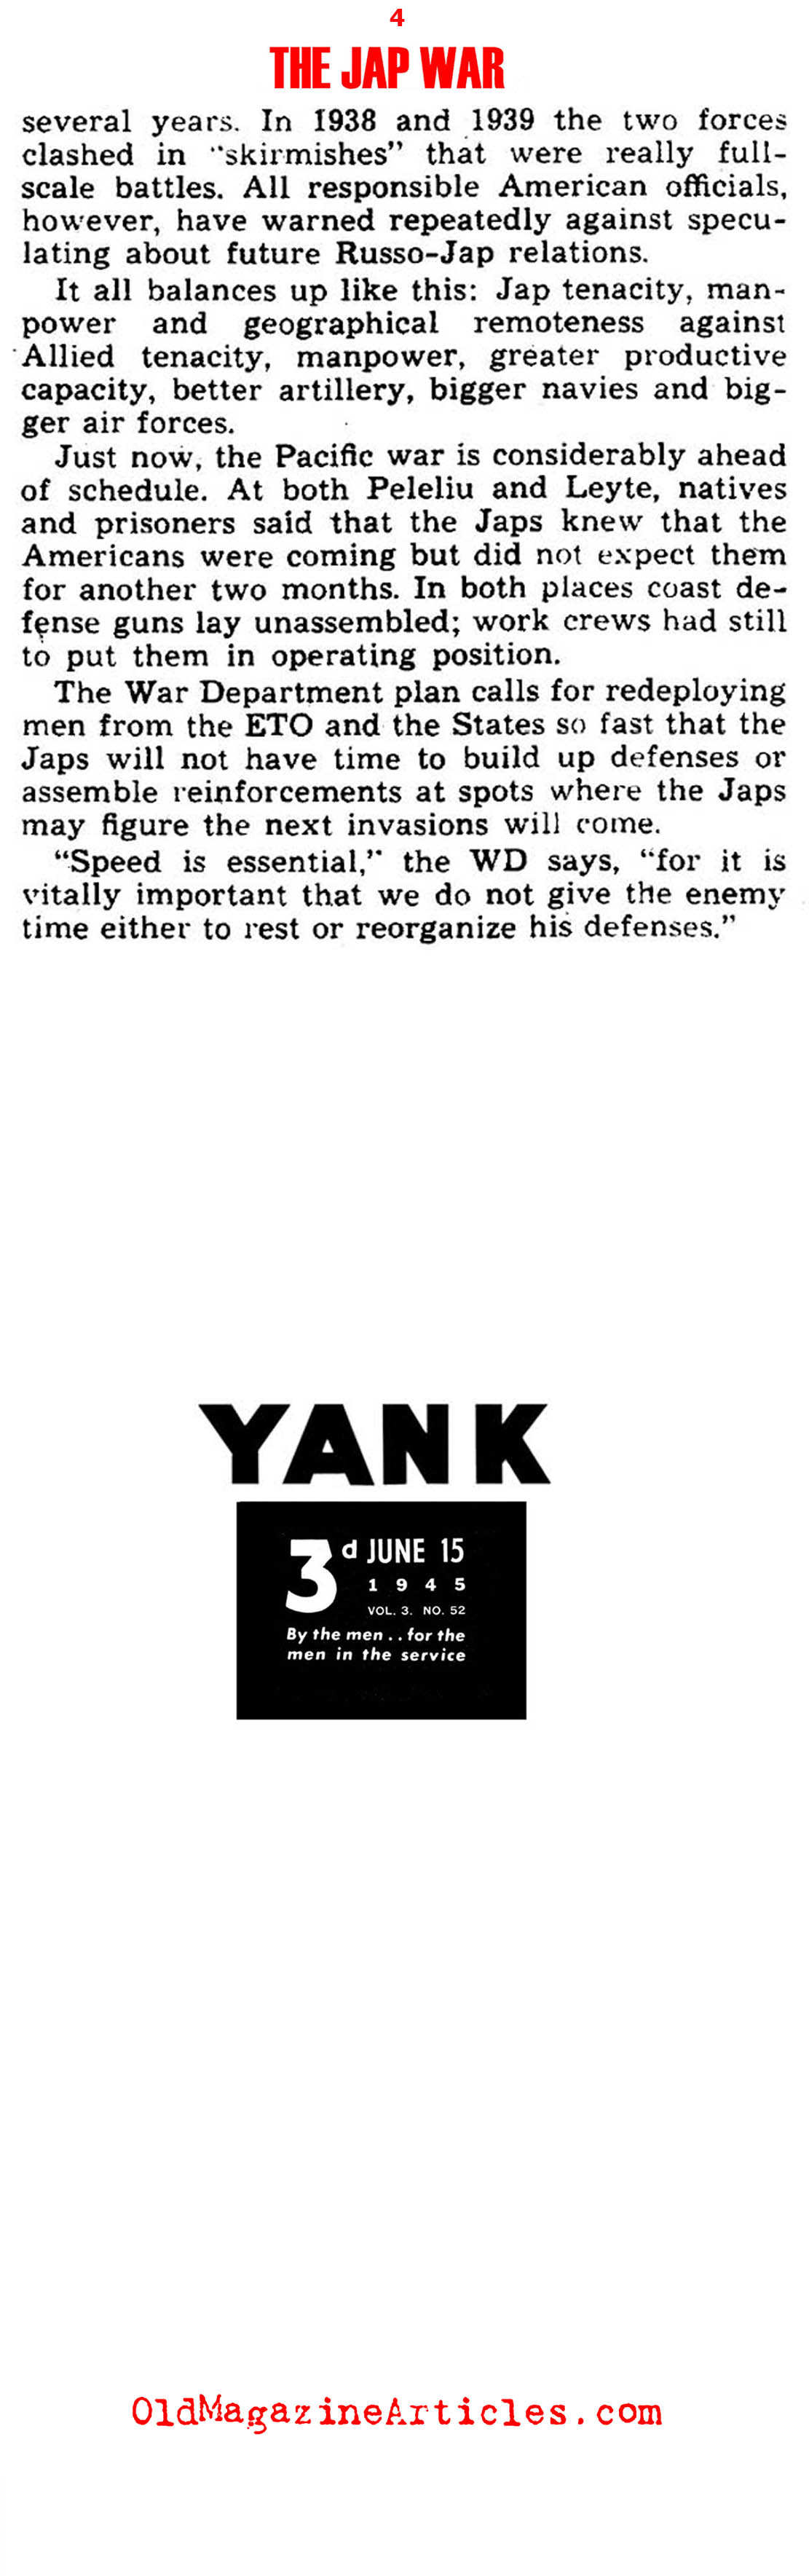 1945  Victory Strategies for the Pacific Theater (Yank Magazine, 1945)